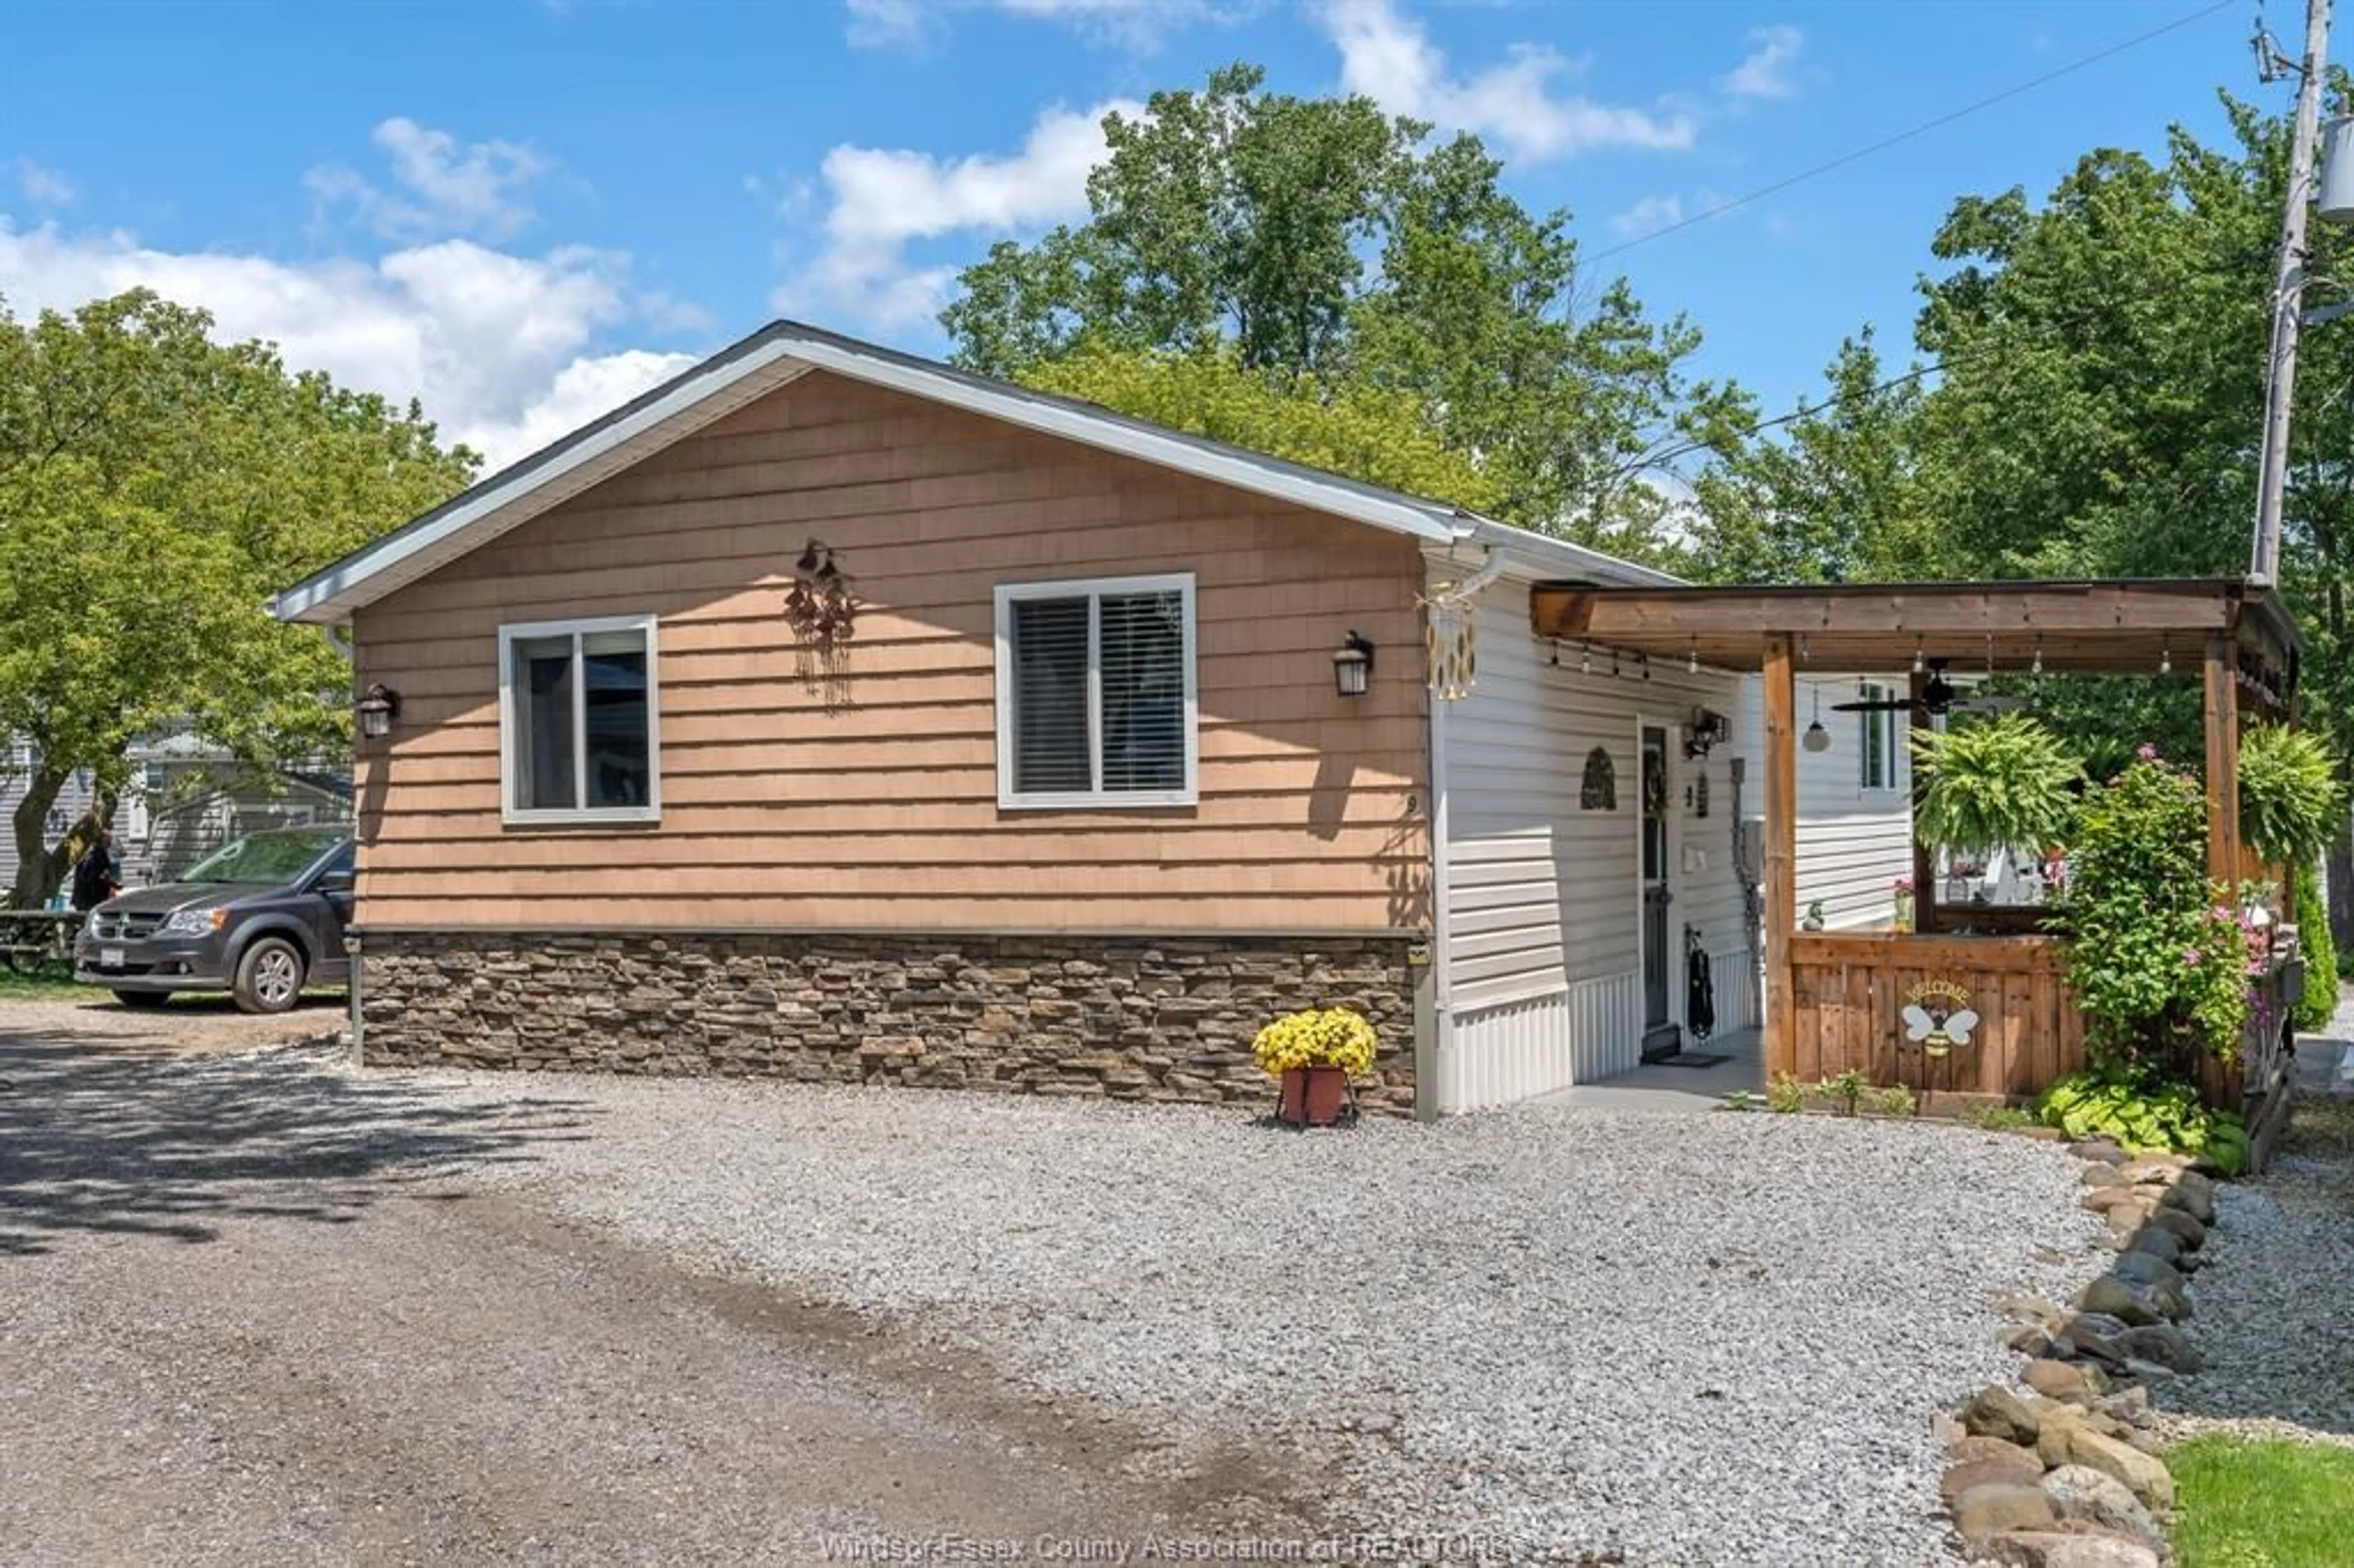 Cottage for 20951 Pier Road 9 Lake Rd, Wheatley Ontario N0P 2P0